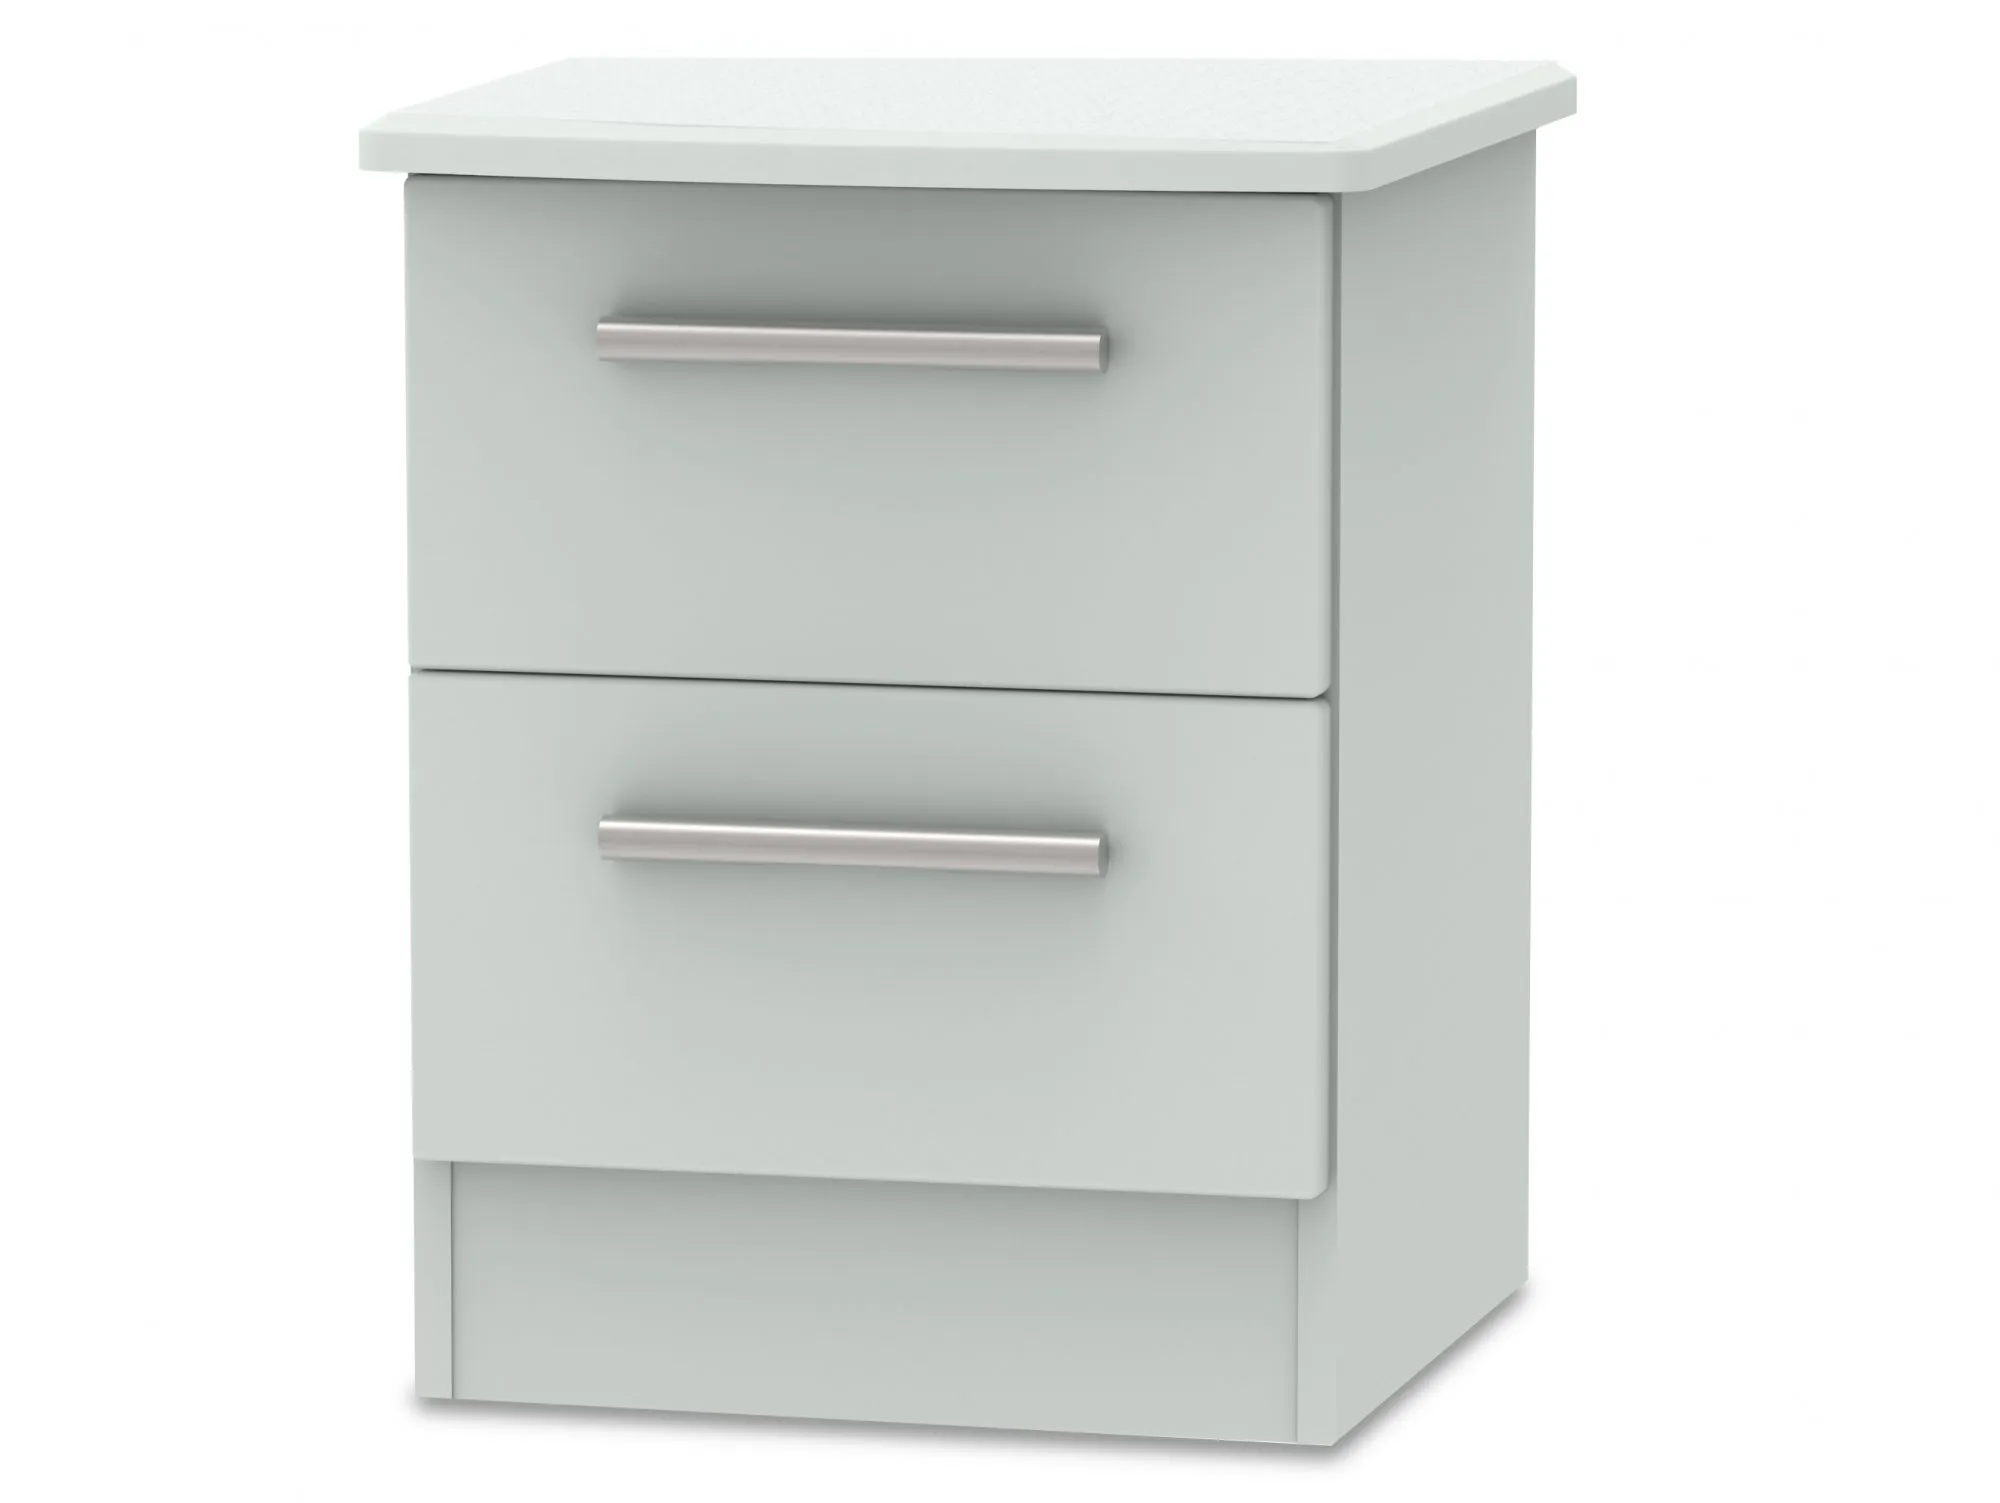 Welcome Welcome Knightsbridge Matt Grey 2 Drawer Small Bedside Table (Assembled)